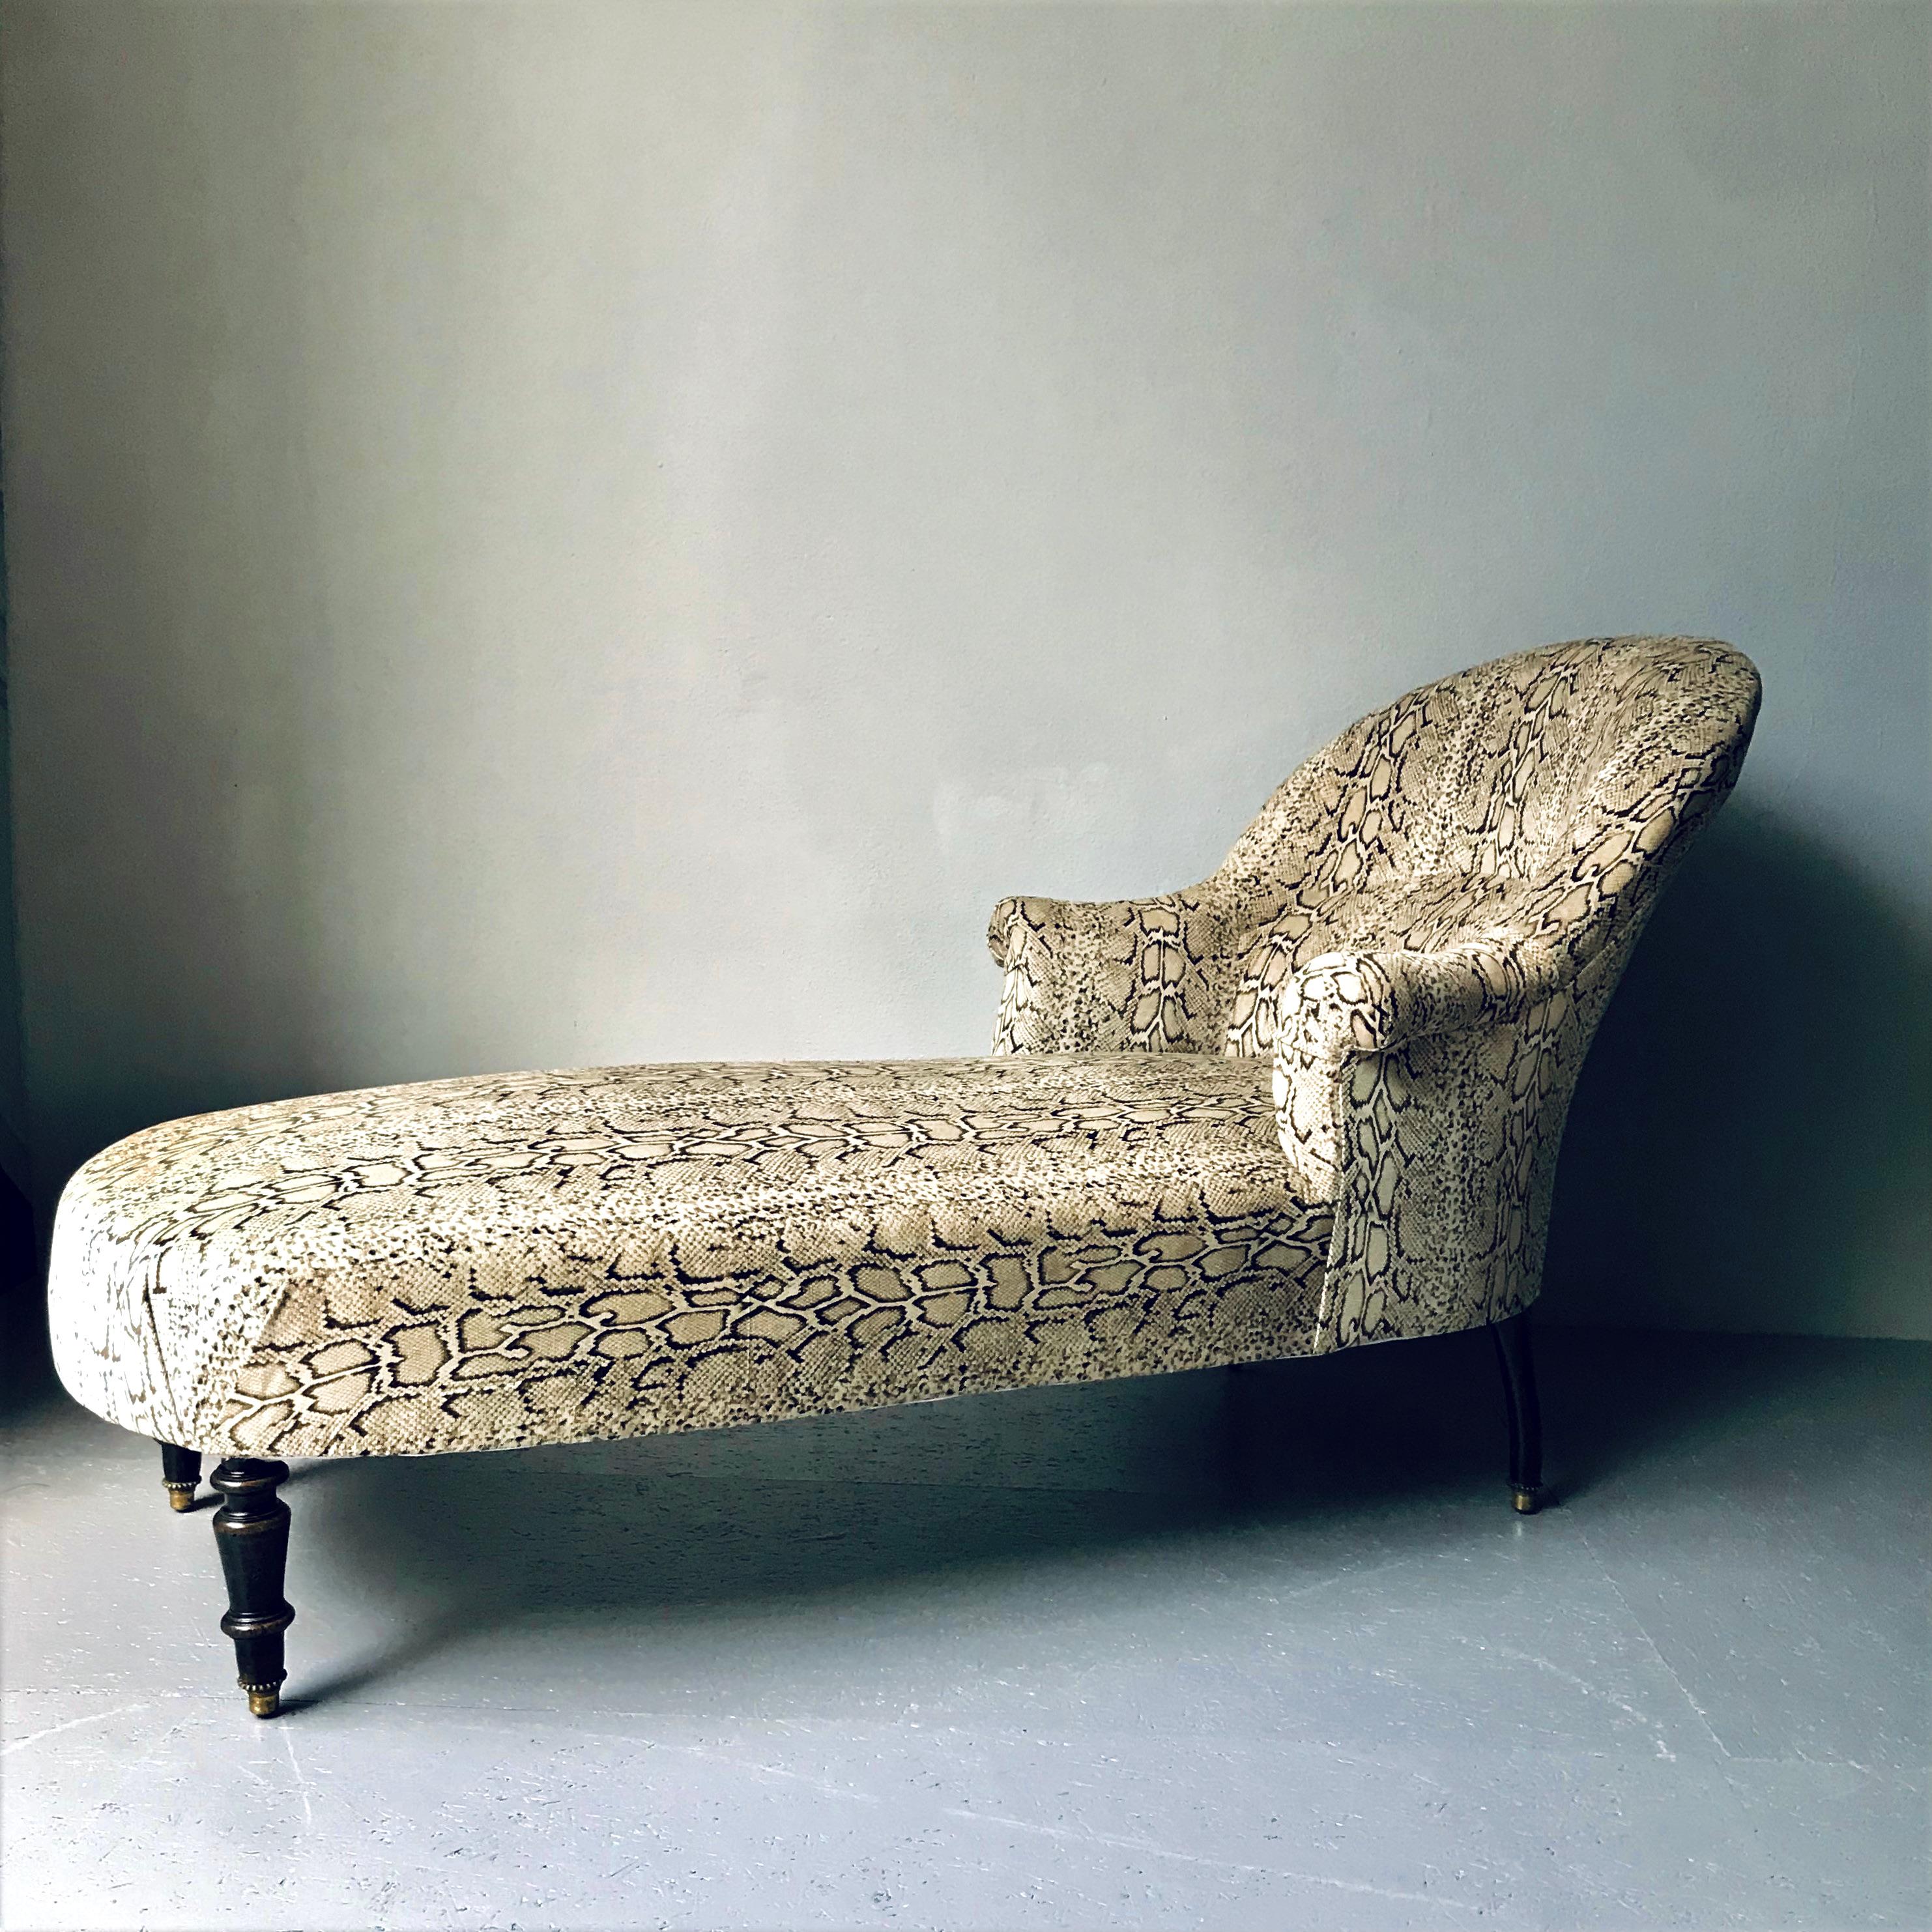 Welcome to the roaring 1920's. This one of a kind vintage French chaise longue has been traditionally reupholstered and brought back to life. With it's elegant long lines, double armrests and silk blended velvet it ensures the perfect seat comfort.